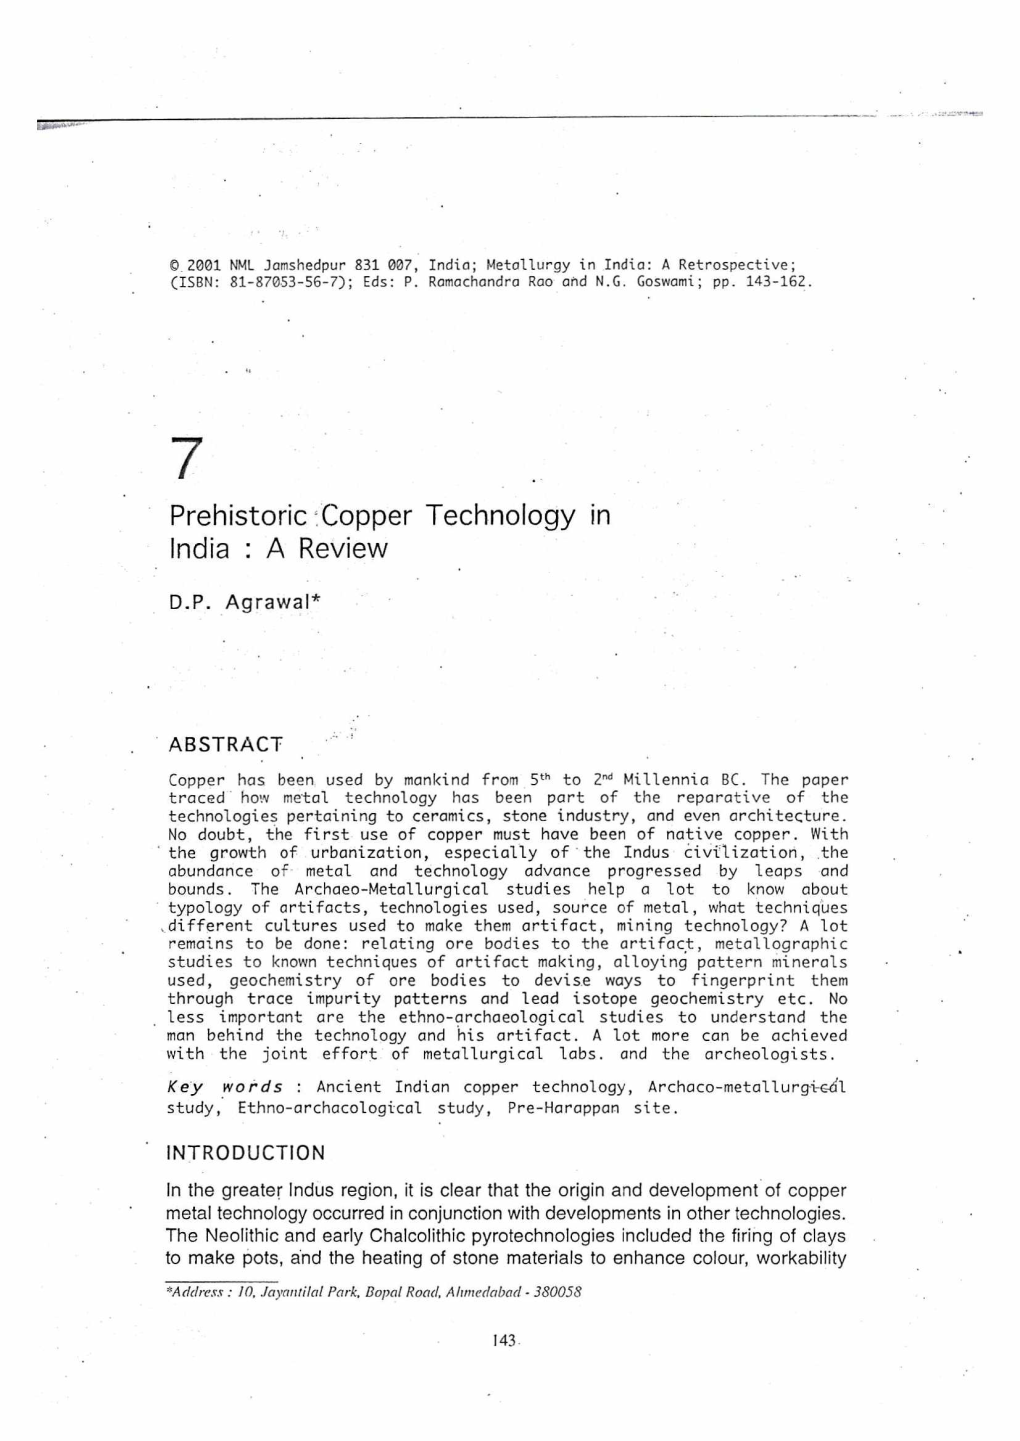 Copper Technology in India : a Review